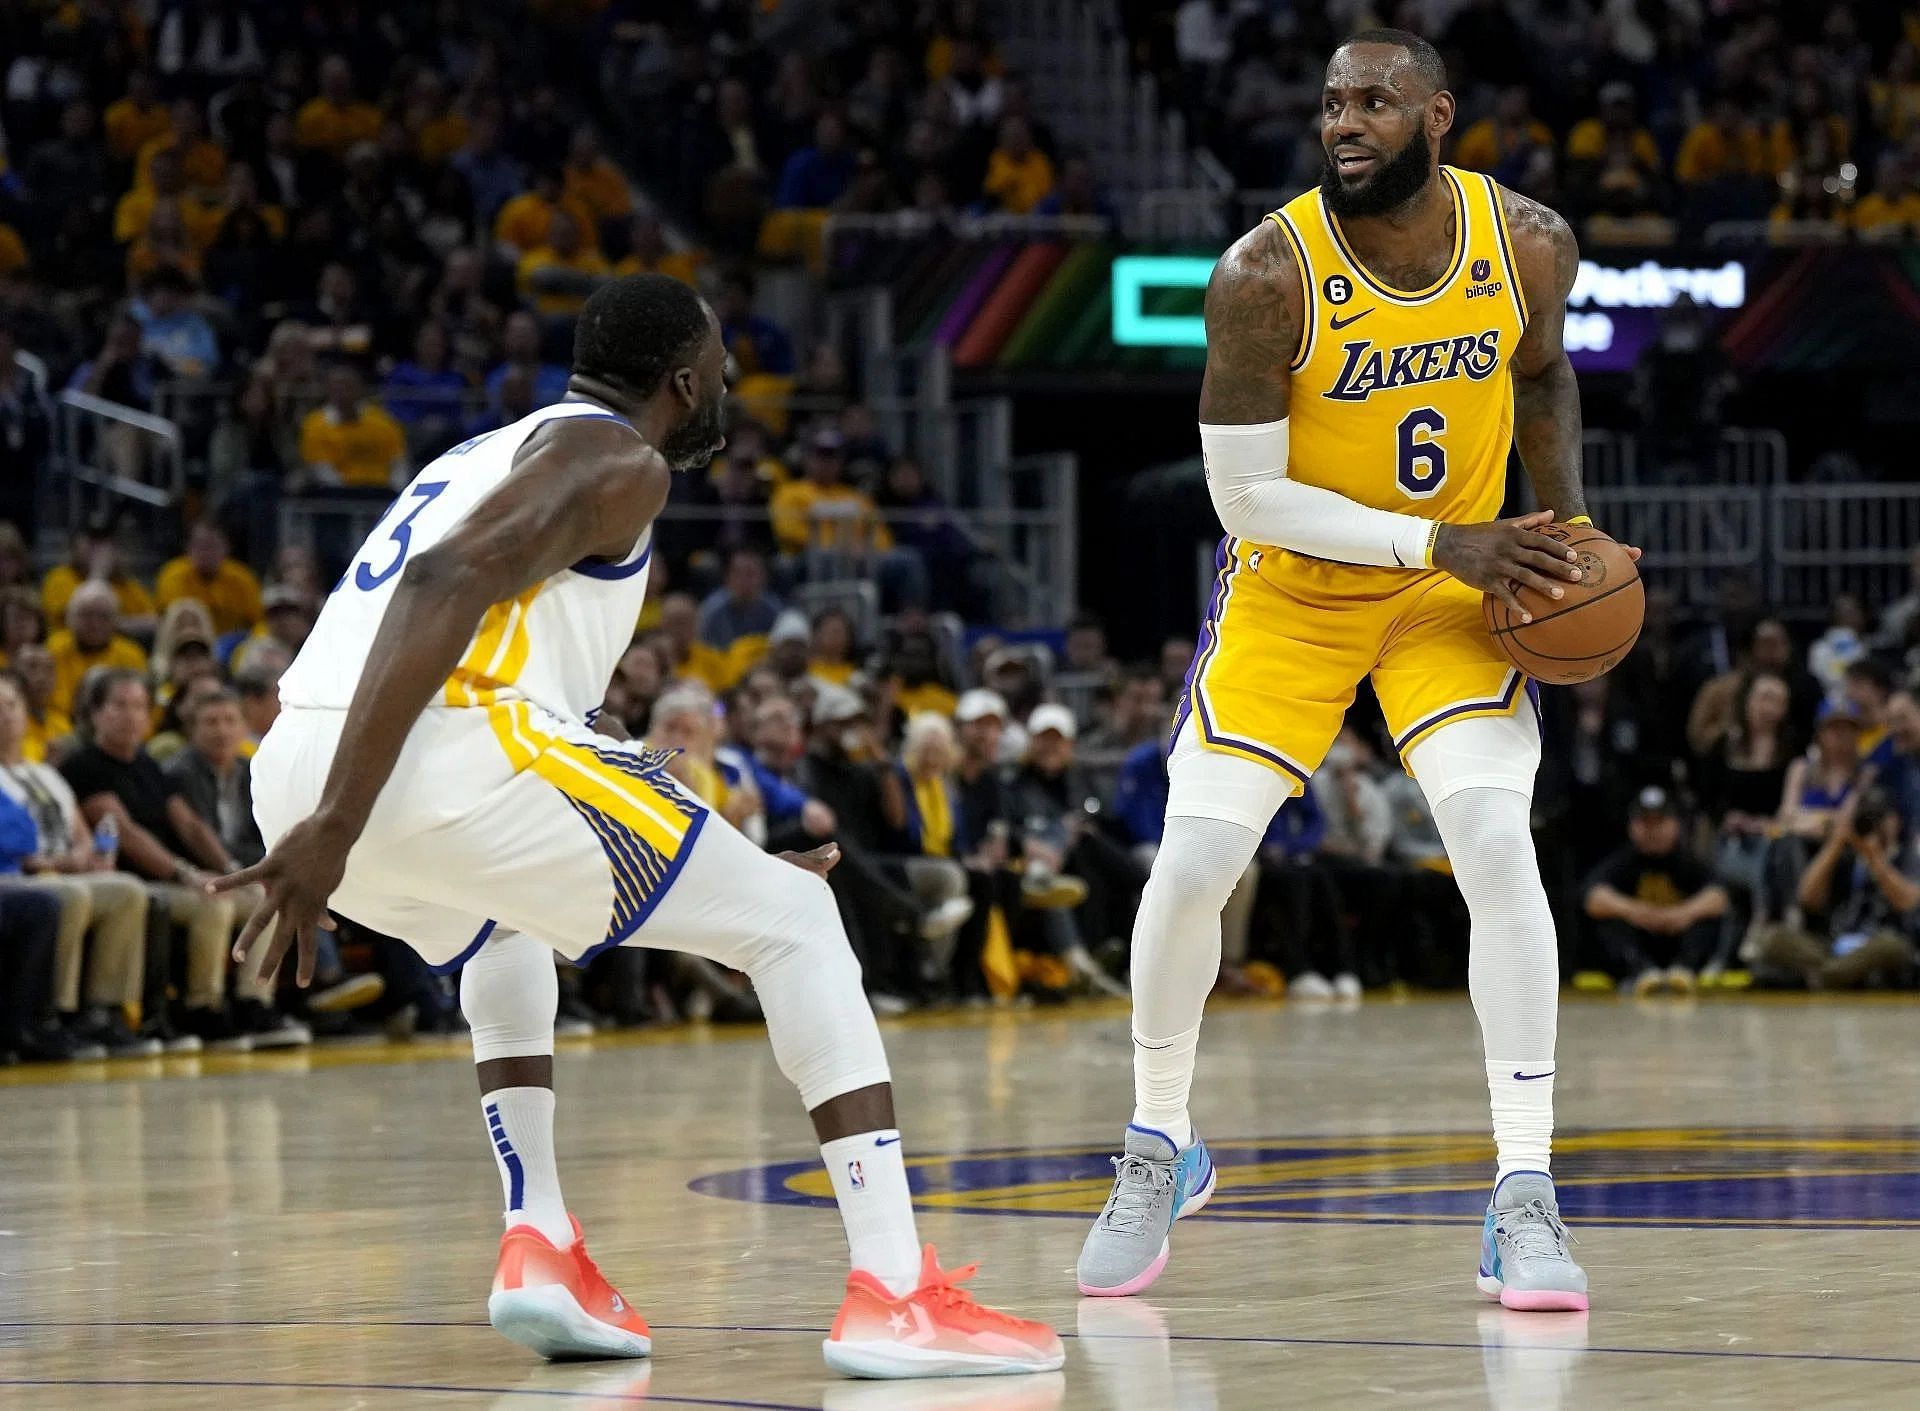 LeBron James joined the Los Angeles Lakers in the 2018-19 NBA season.